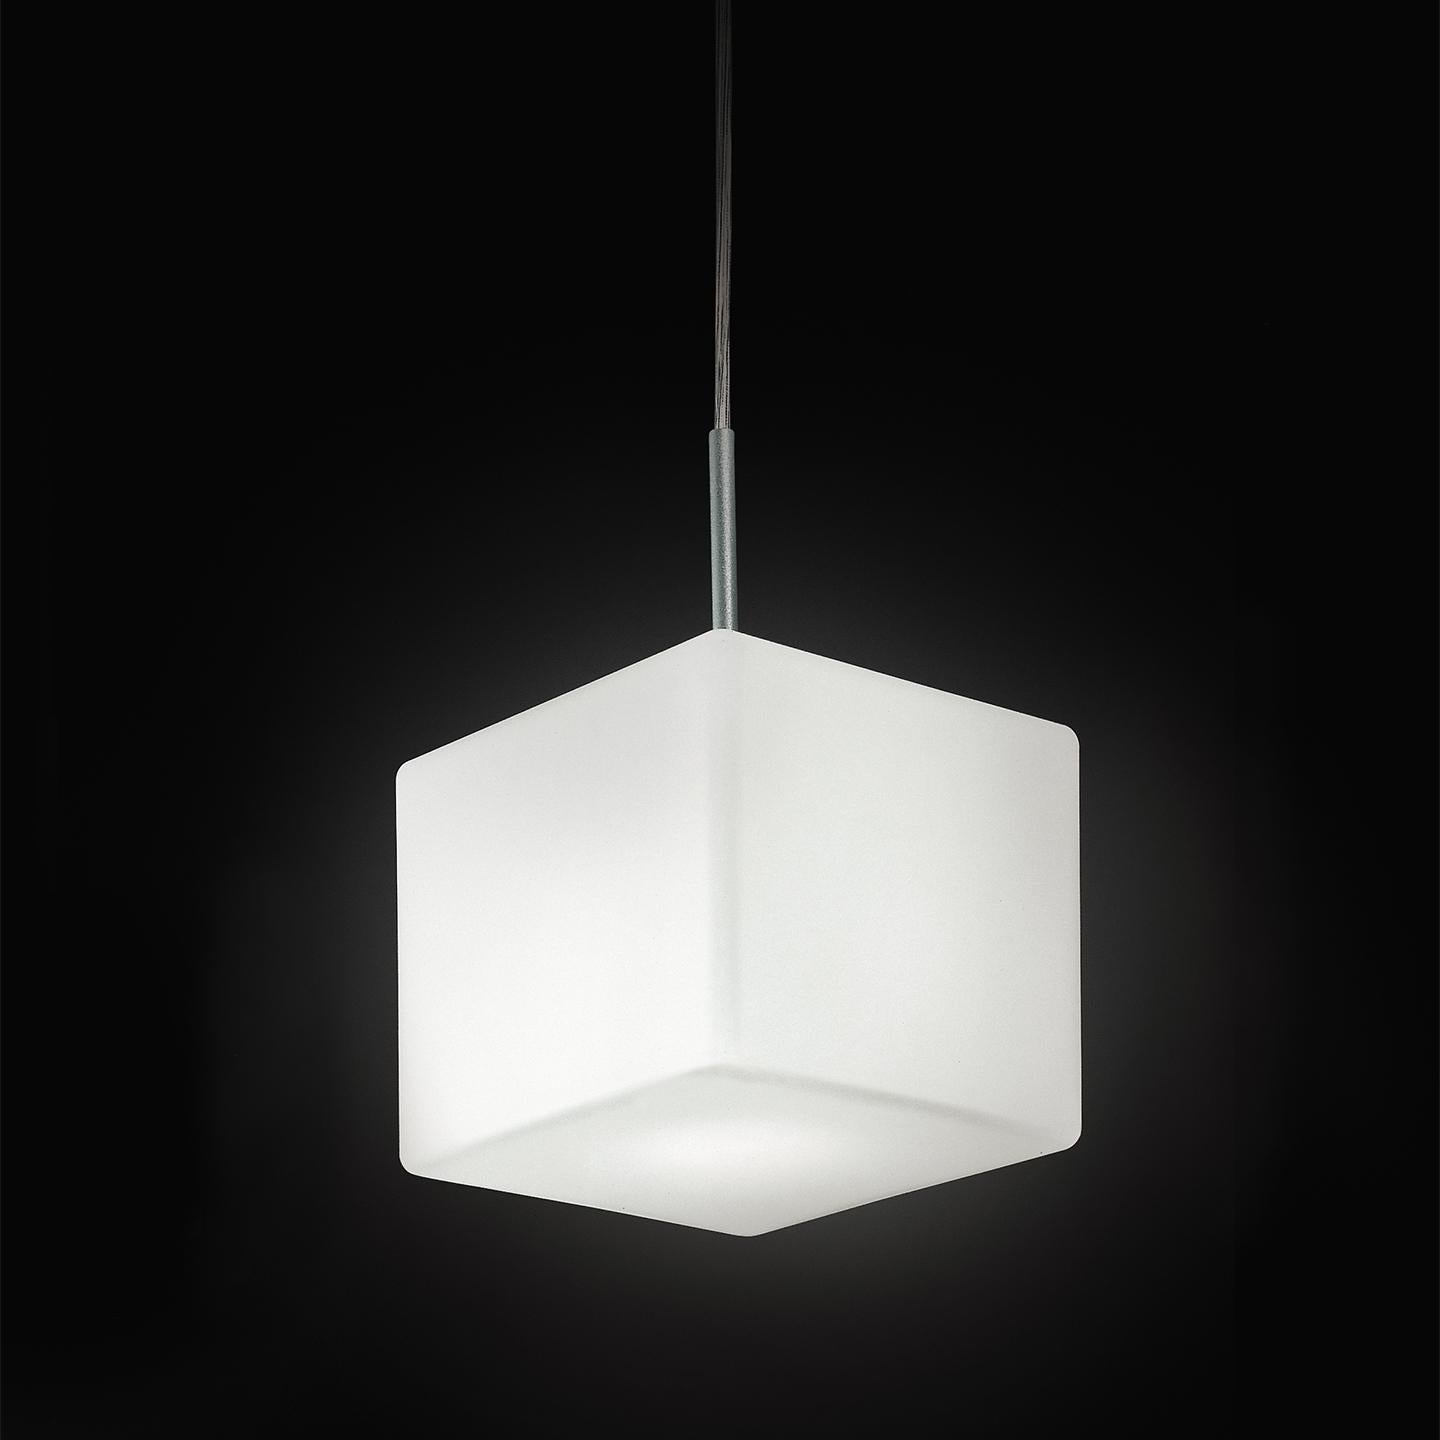 The Cubi pendant, designed in 2000, is an icon of Leucos. Its cubic form is surprising for handmade glass, which makes it a delightful lamp. Its hand blown satin white diffuser is made of multiple layers of glass to create a rich, white look. This